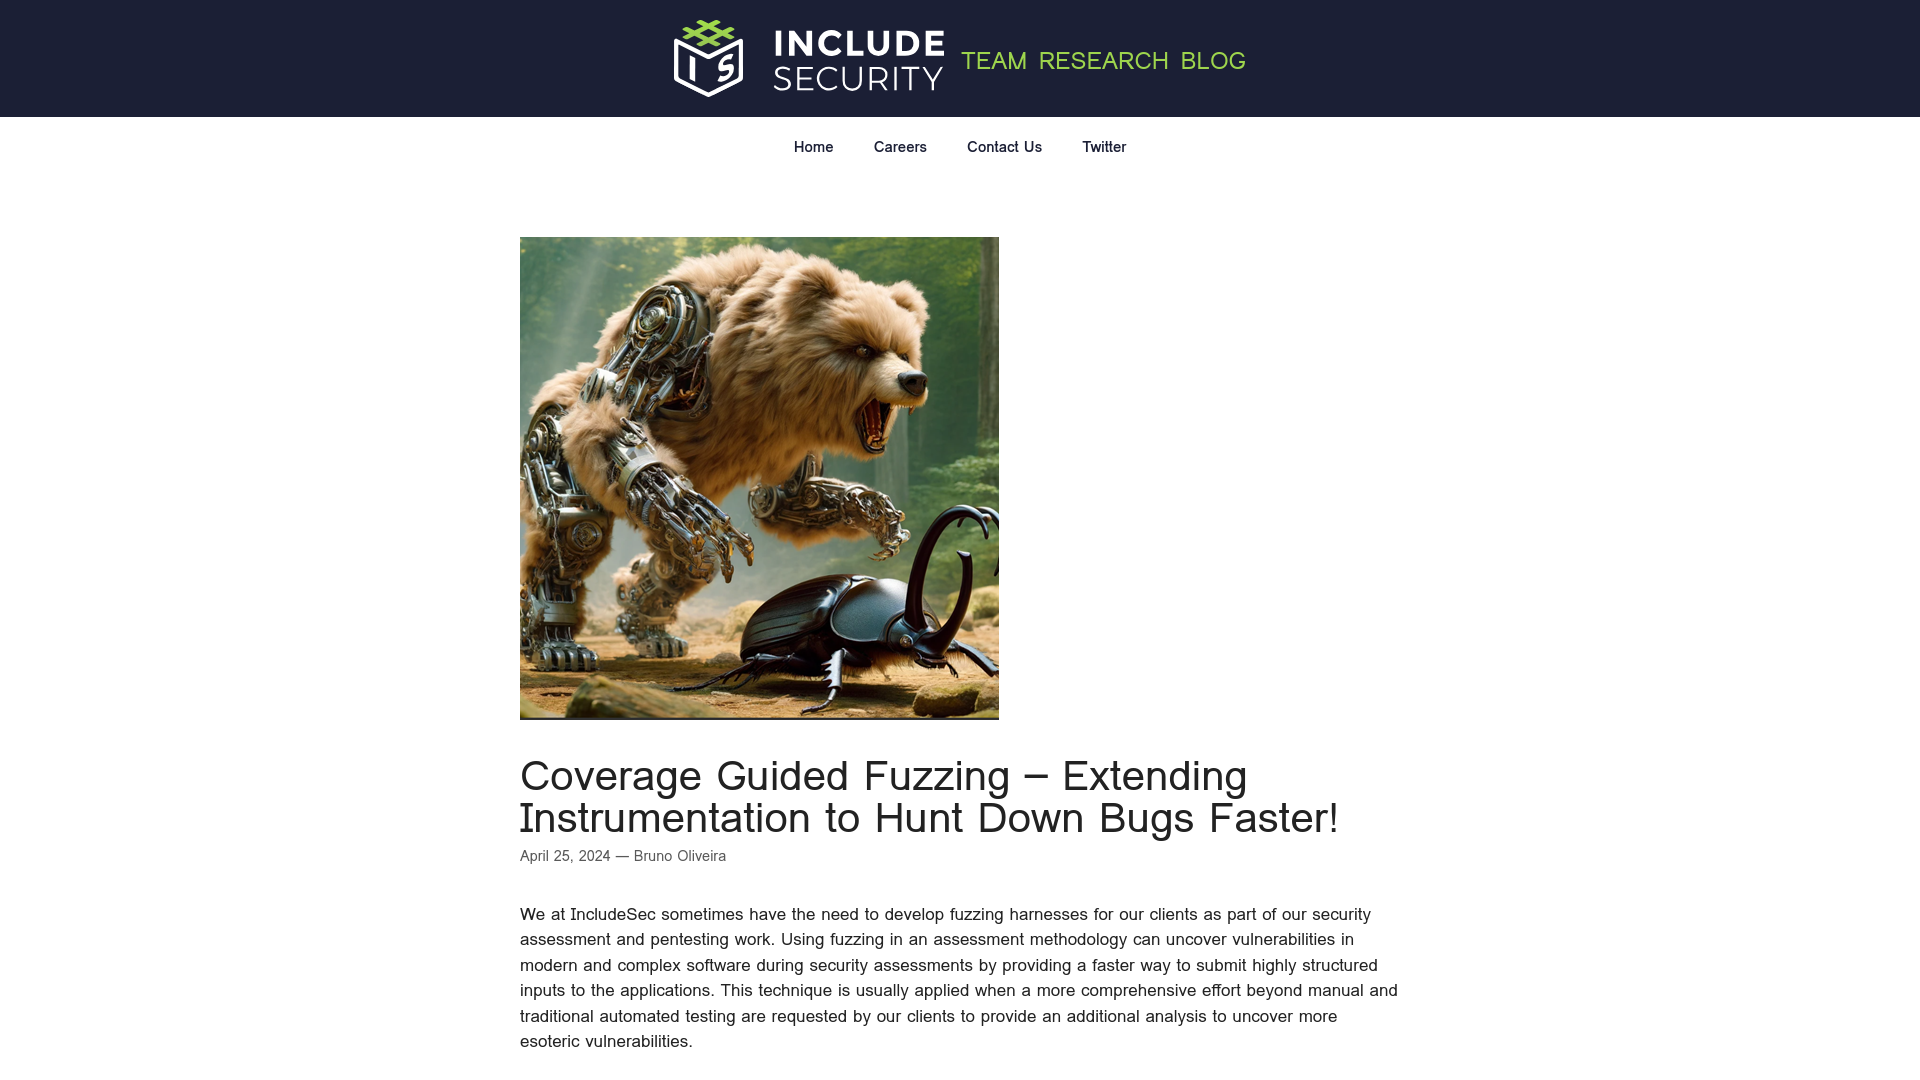 Coverage Guided Fuzzing - Extending Instrumentation to Hunt Down Bugs Faster! - Include Security Research Blog